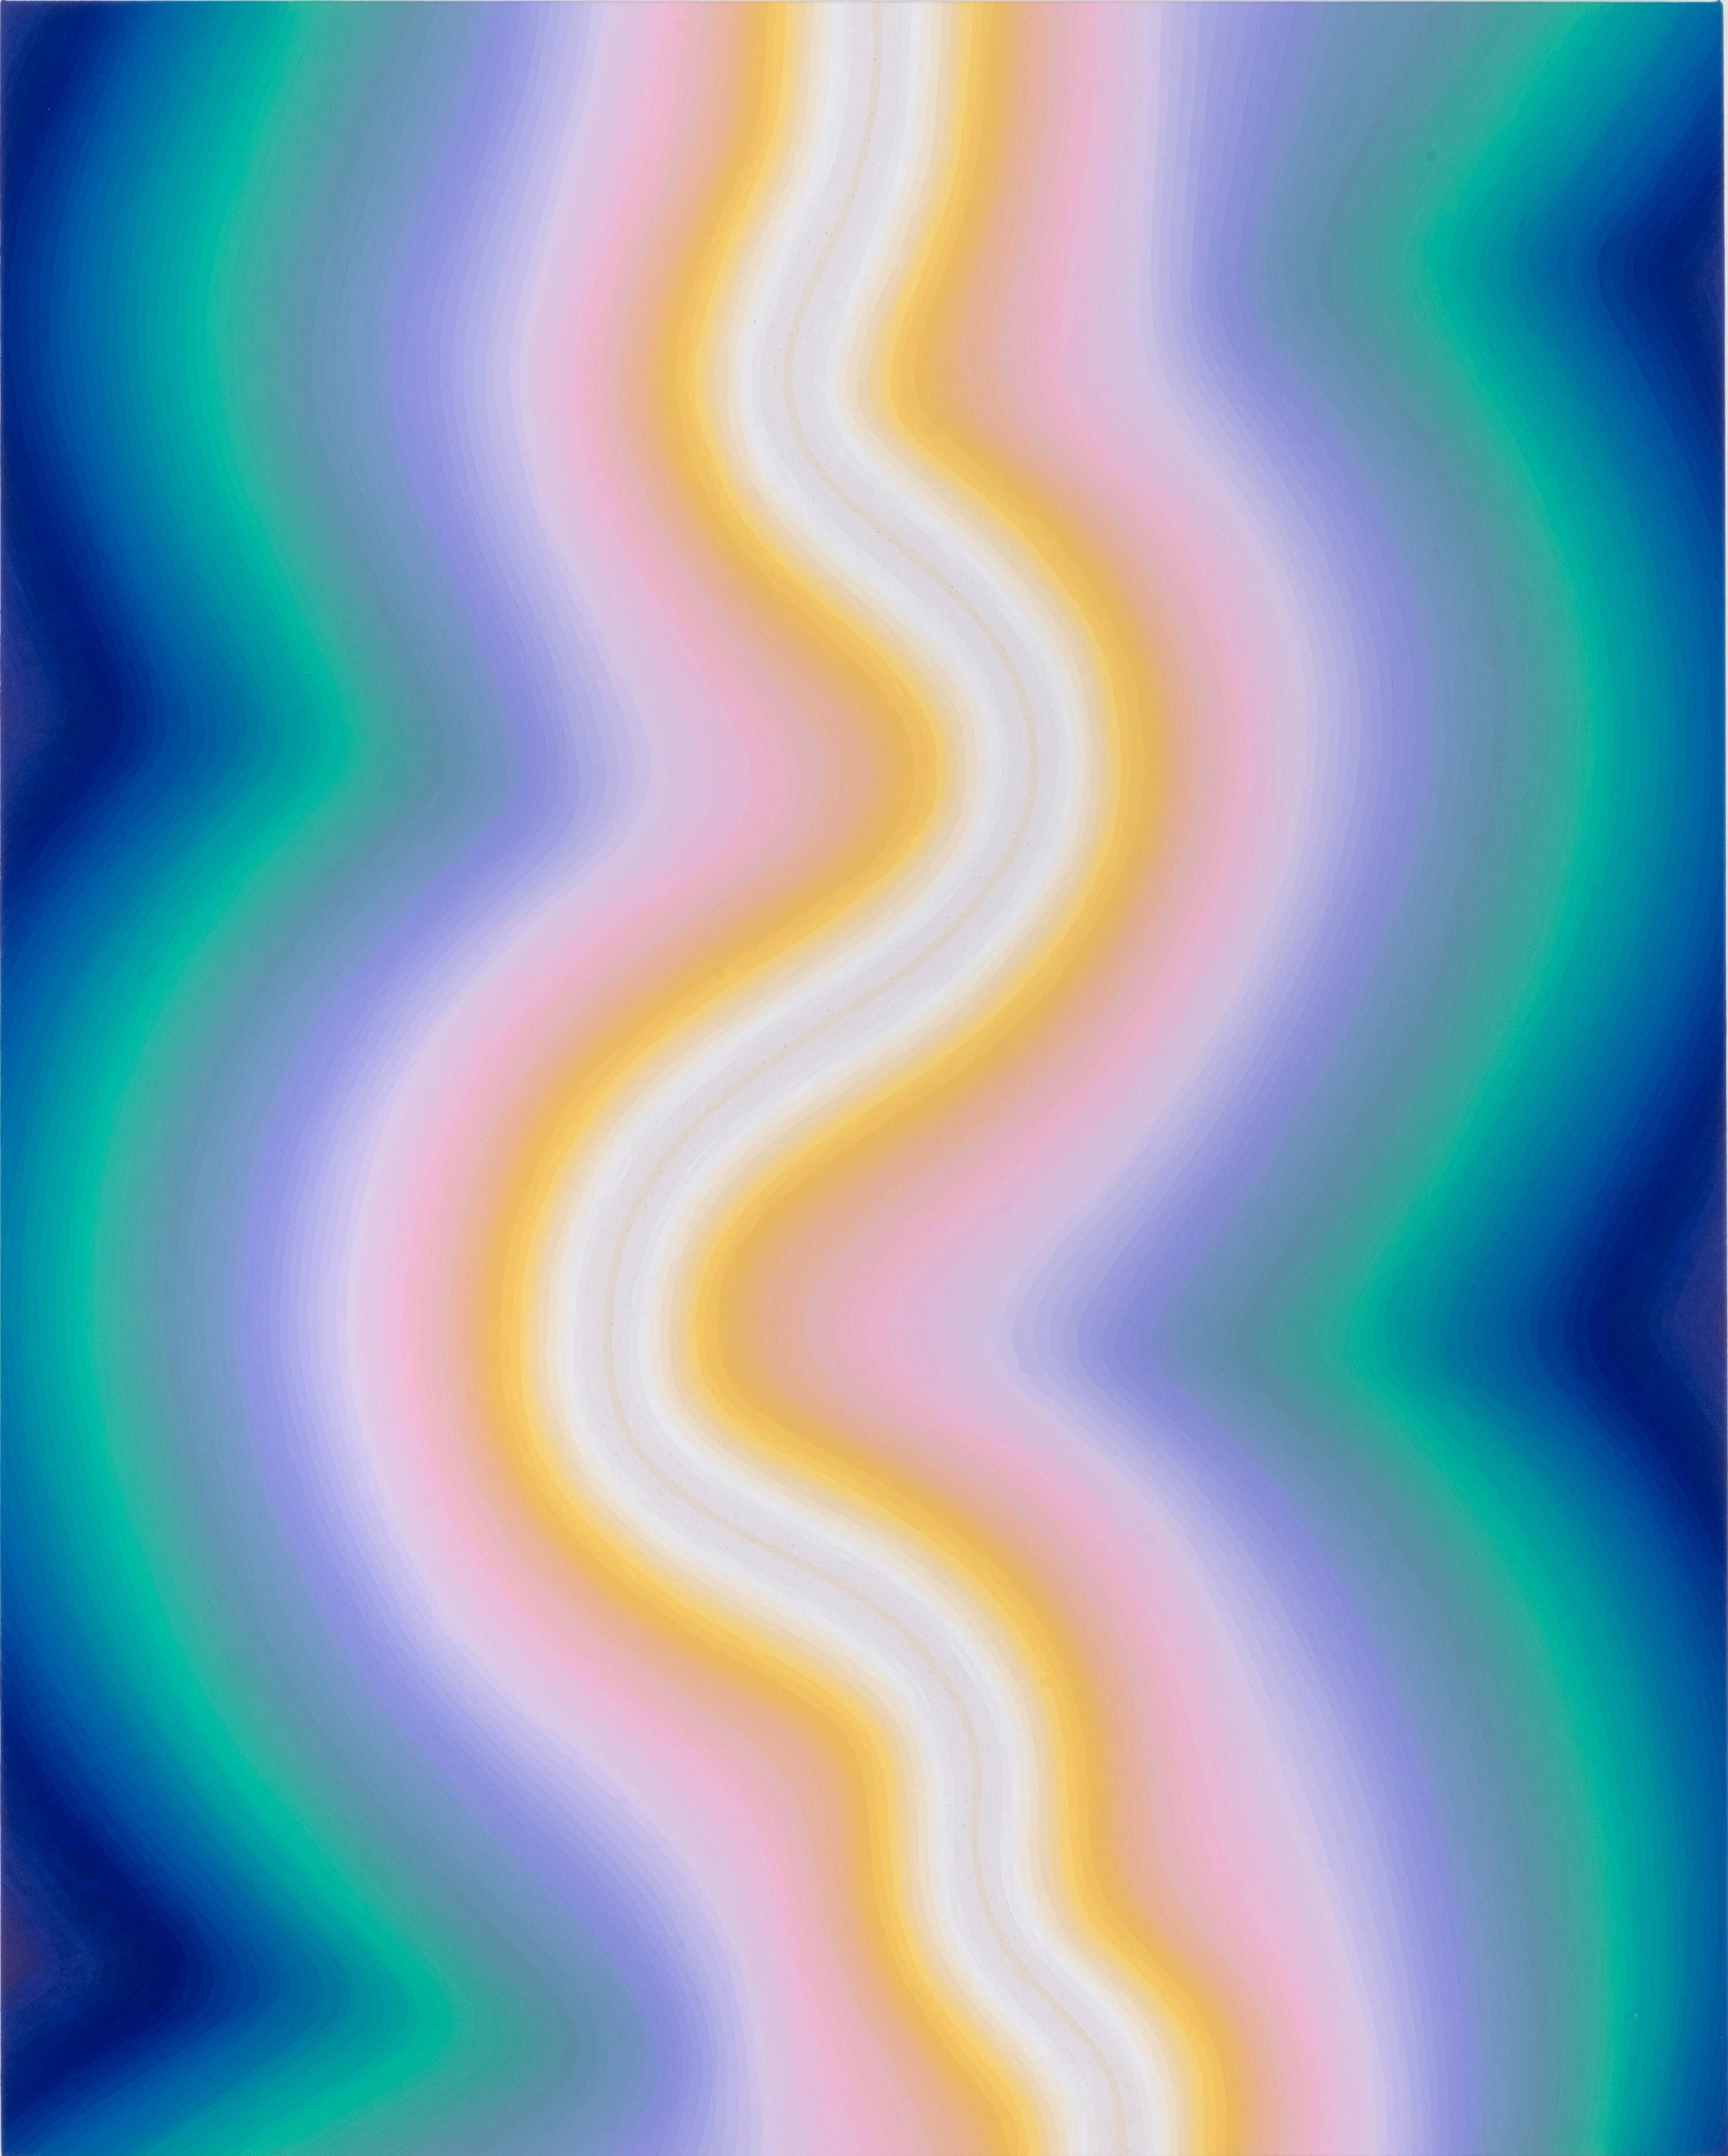 In this large vertical abstract flashe and acrylic medium painting on canvas, curving striations of gradient color start from bright cobalt blue at the edges and transition to pale mint, teal green,  lilac, pale pink and canary yellow to a thick